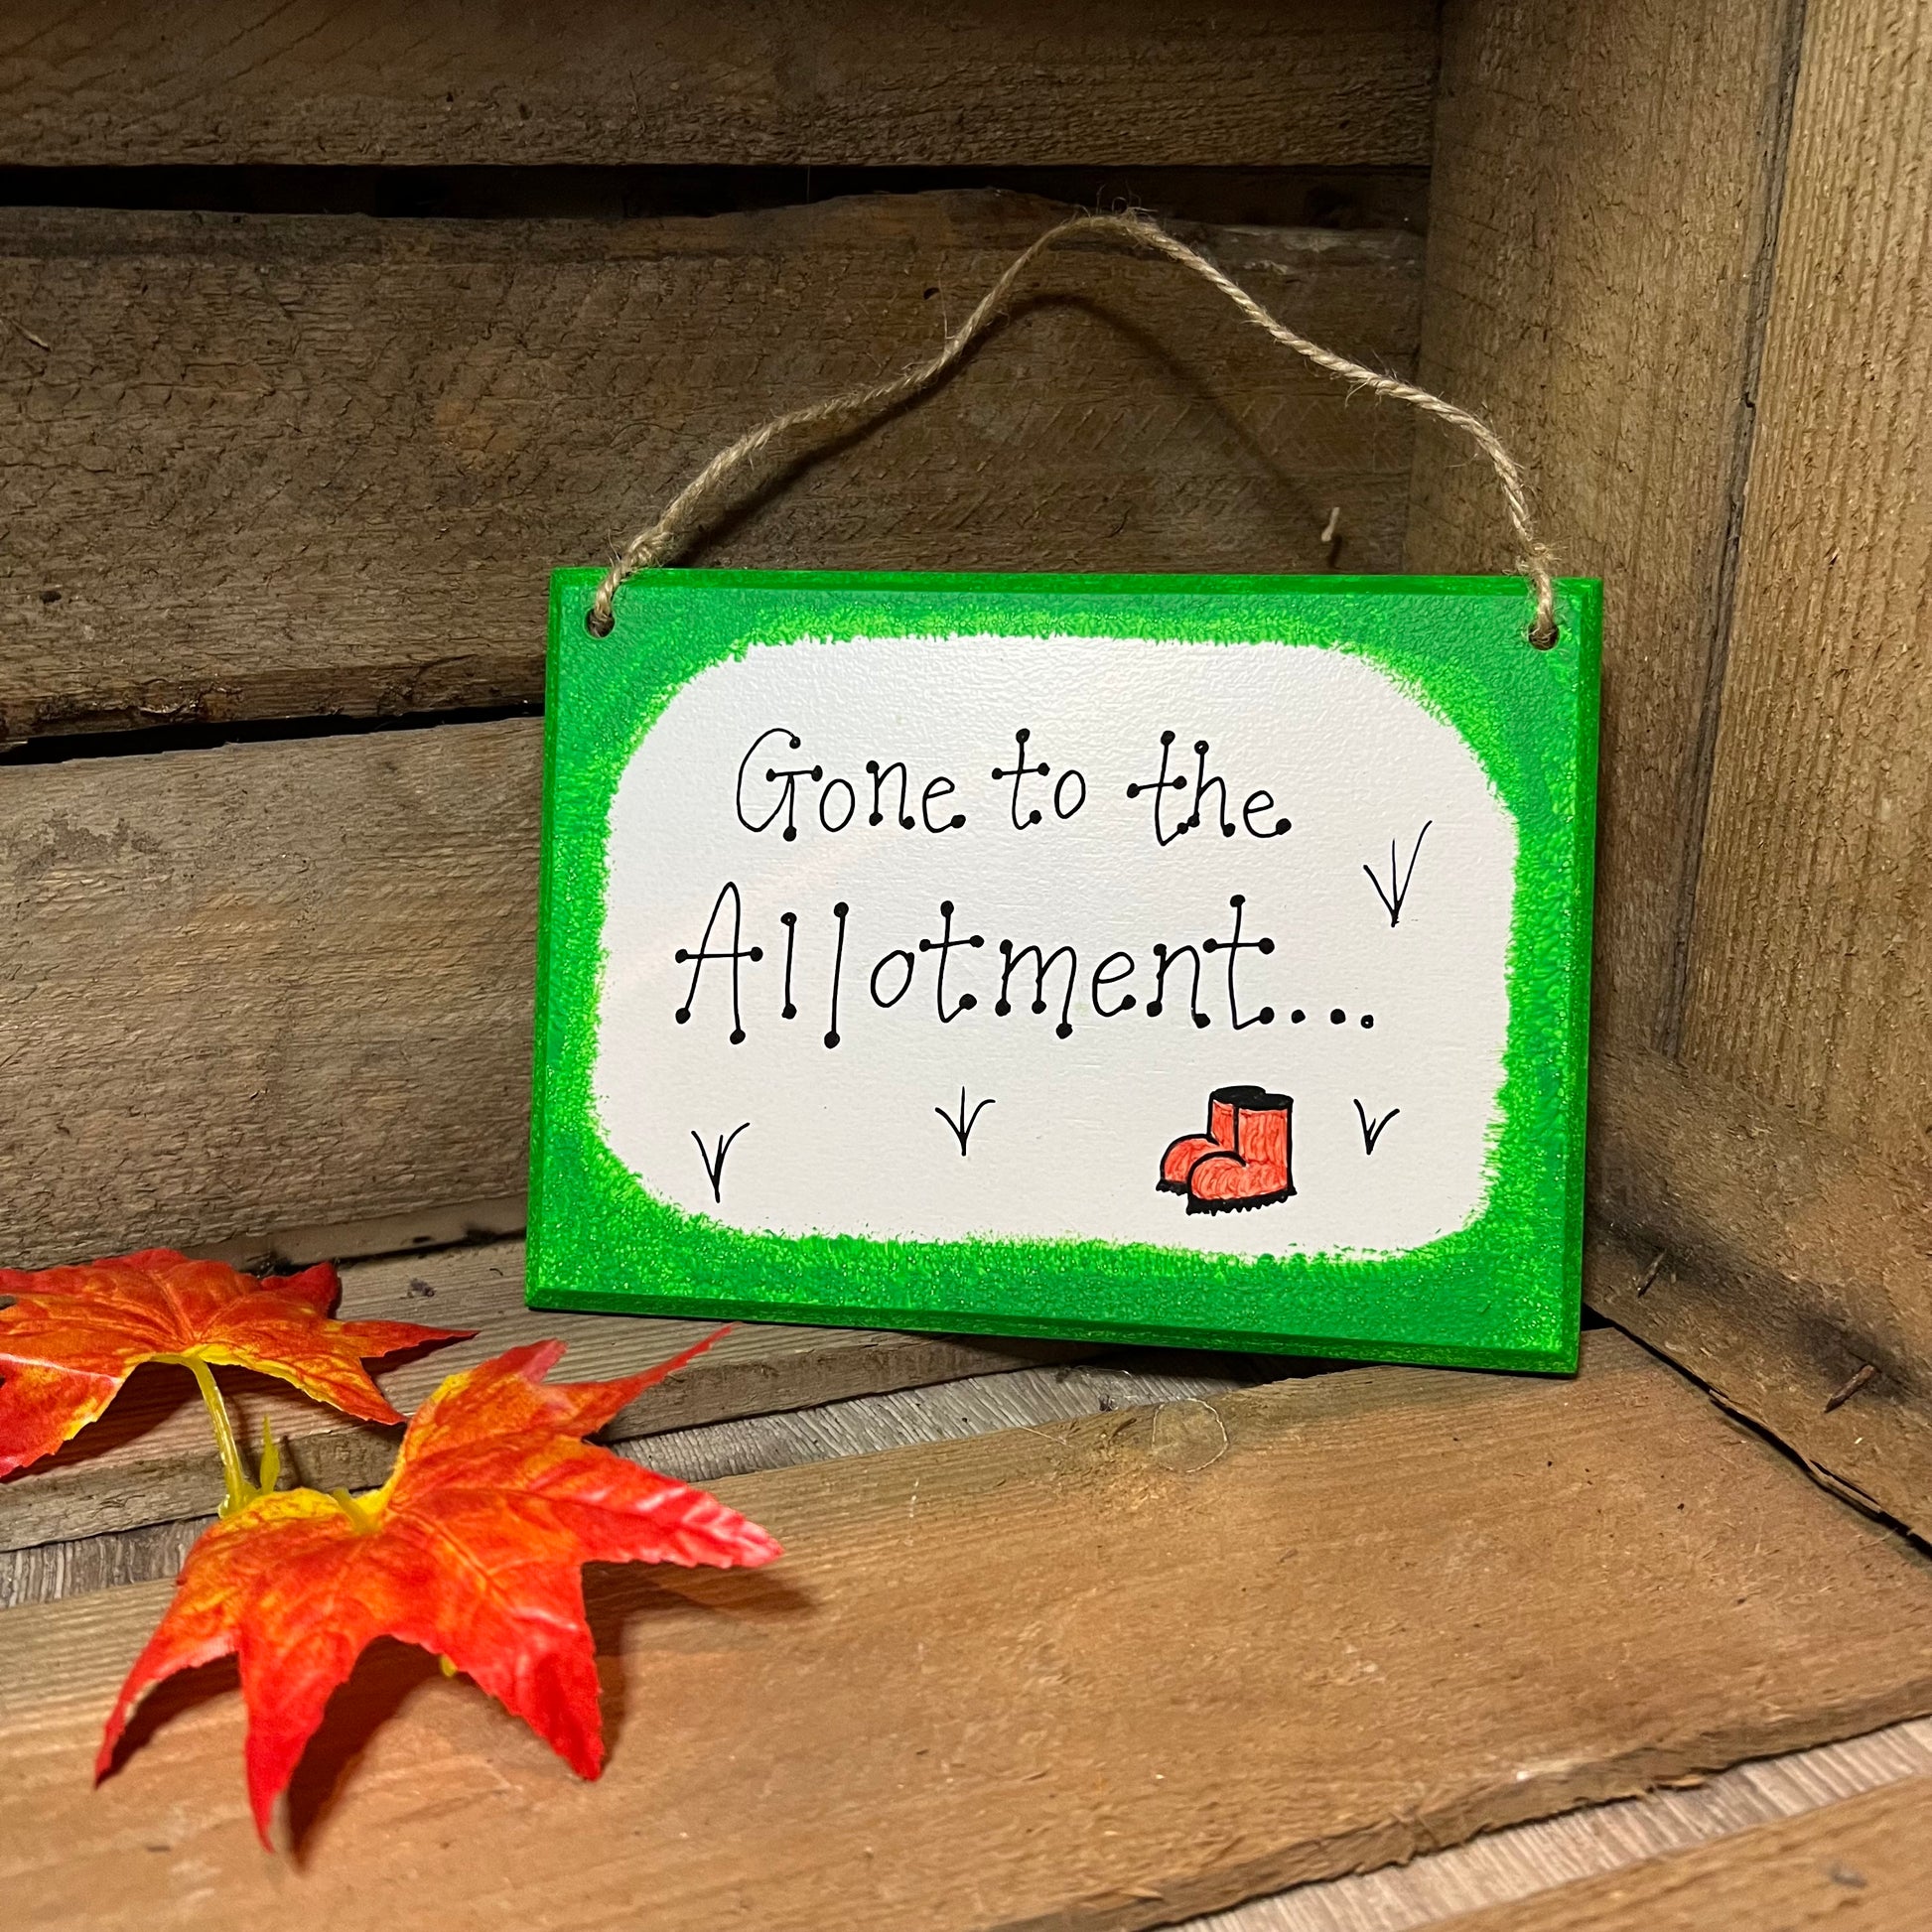 Gone to the Allotment - Handmade Wooden Plaque - FREE DELIVERY from The Wrong End of Town